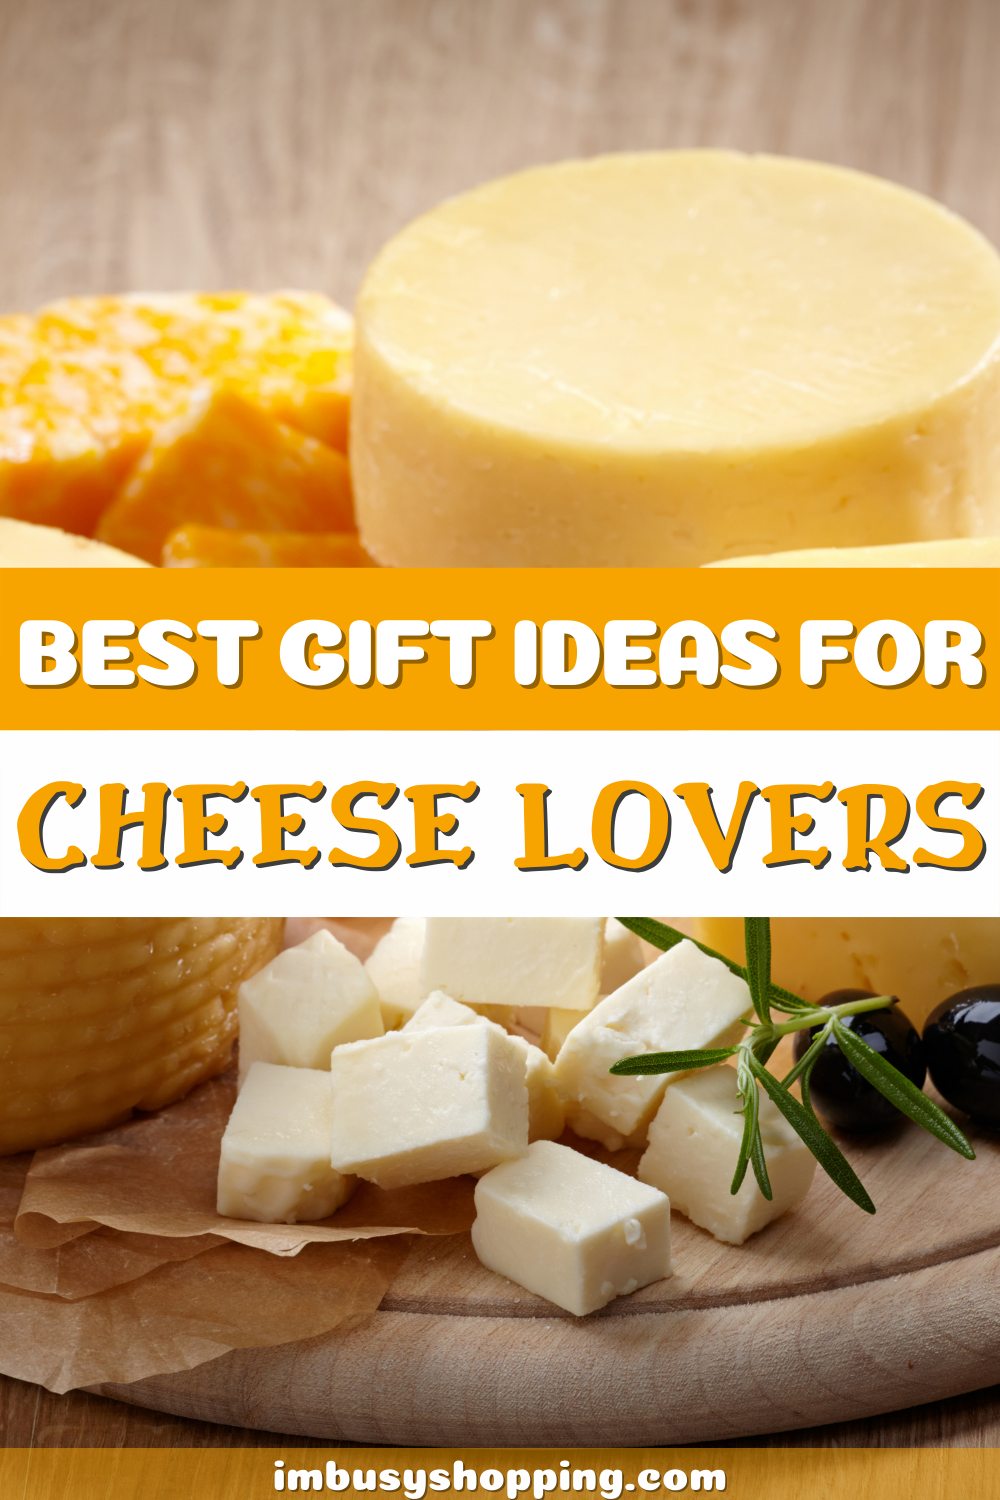 Pin showing the title Best Gift Ideas for Cheese Lovers